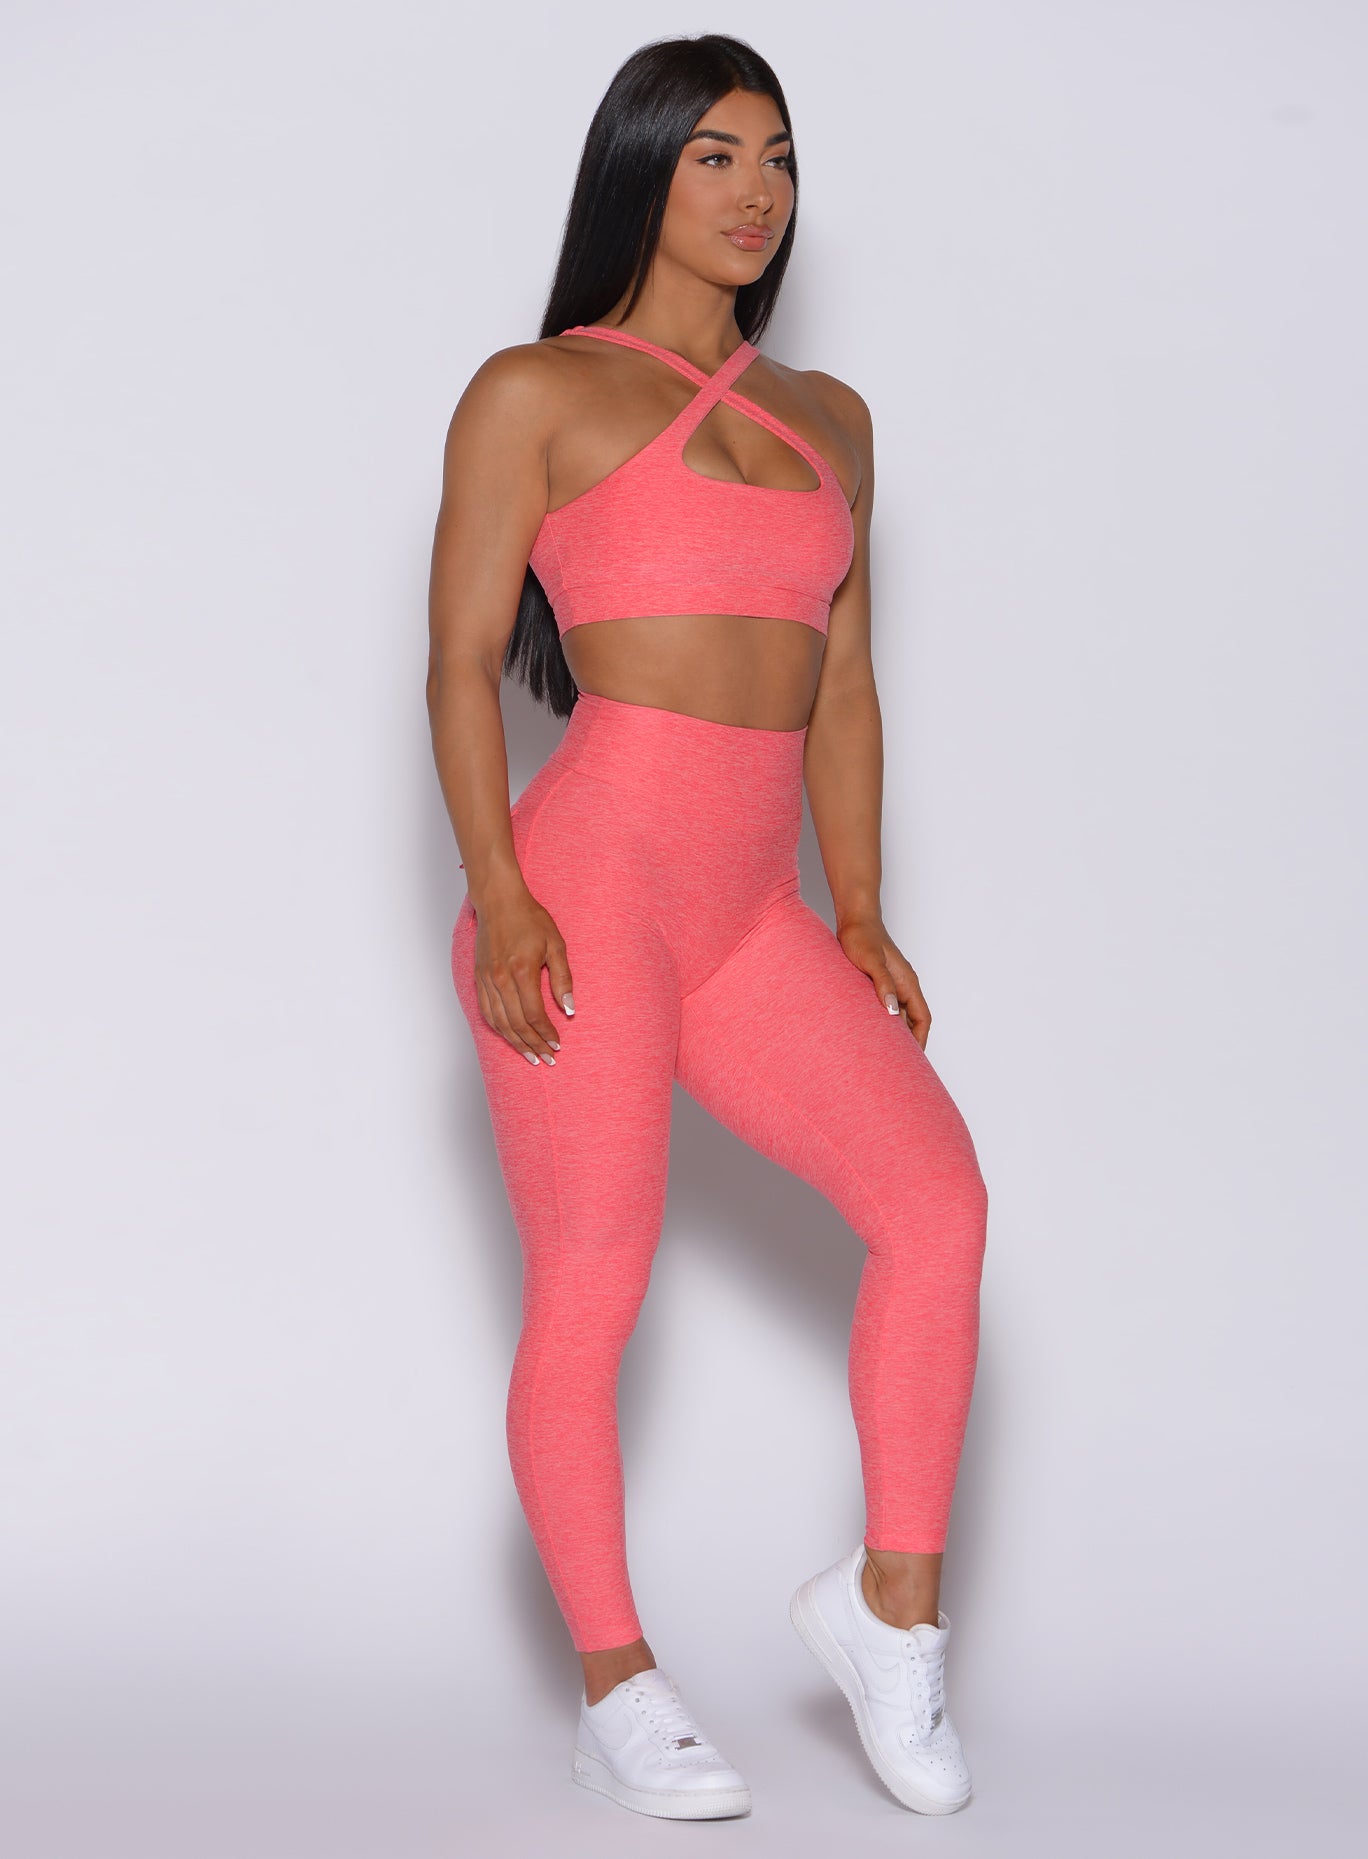 right side profile view of a model angled to her right wearing our Pocket Pop Leggings in papaya color and a matching bra